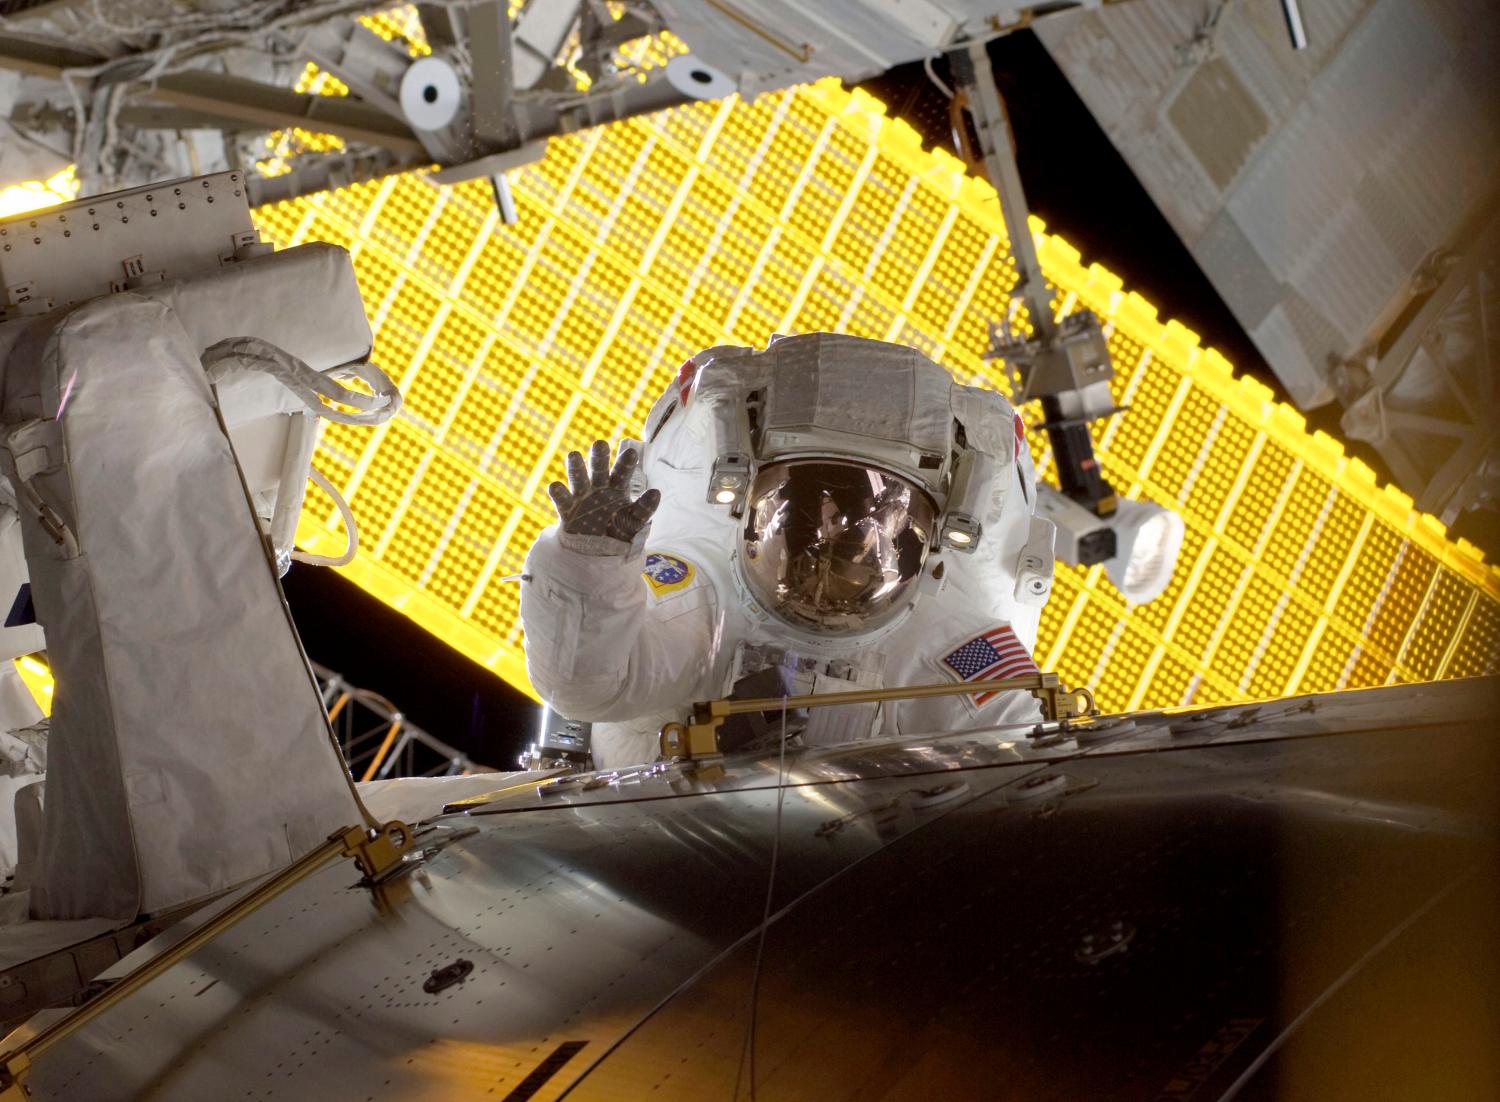 Astronaut Nicole Stott, STS-128 mission specialist waves as she pauses during the mission's first spacewalk with the International Space Station's solar panels as a backdrop as construction and maintenance continue on the International Space Station in this NASA handout photo taken September 1, 2009.